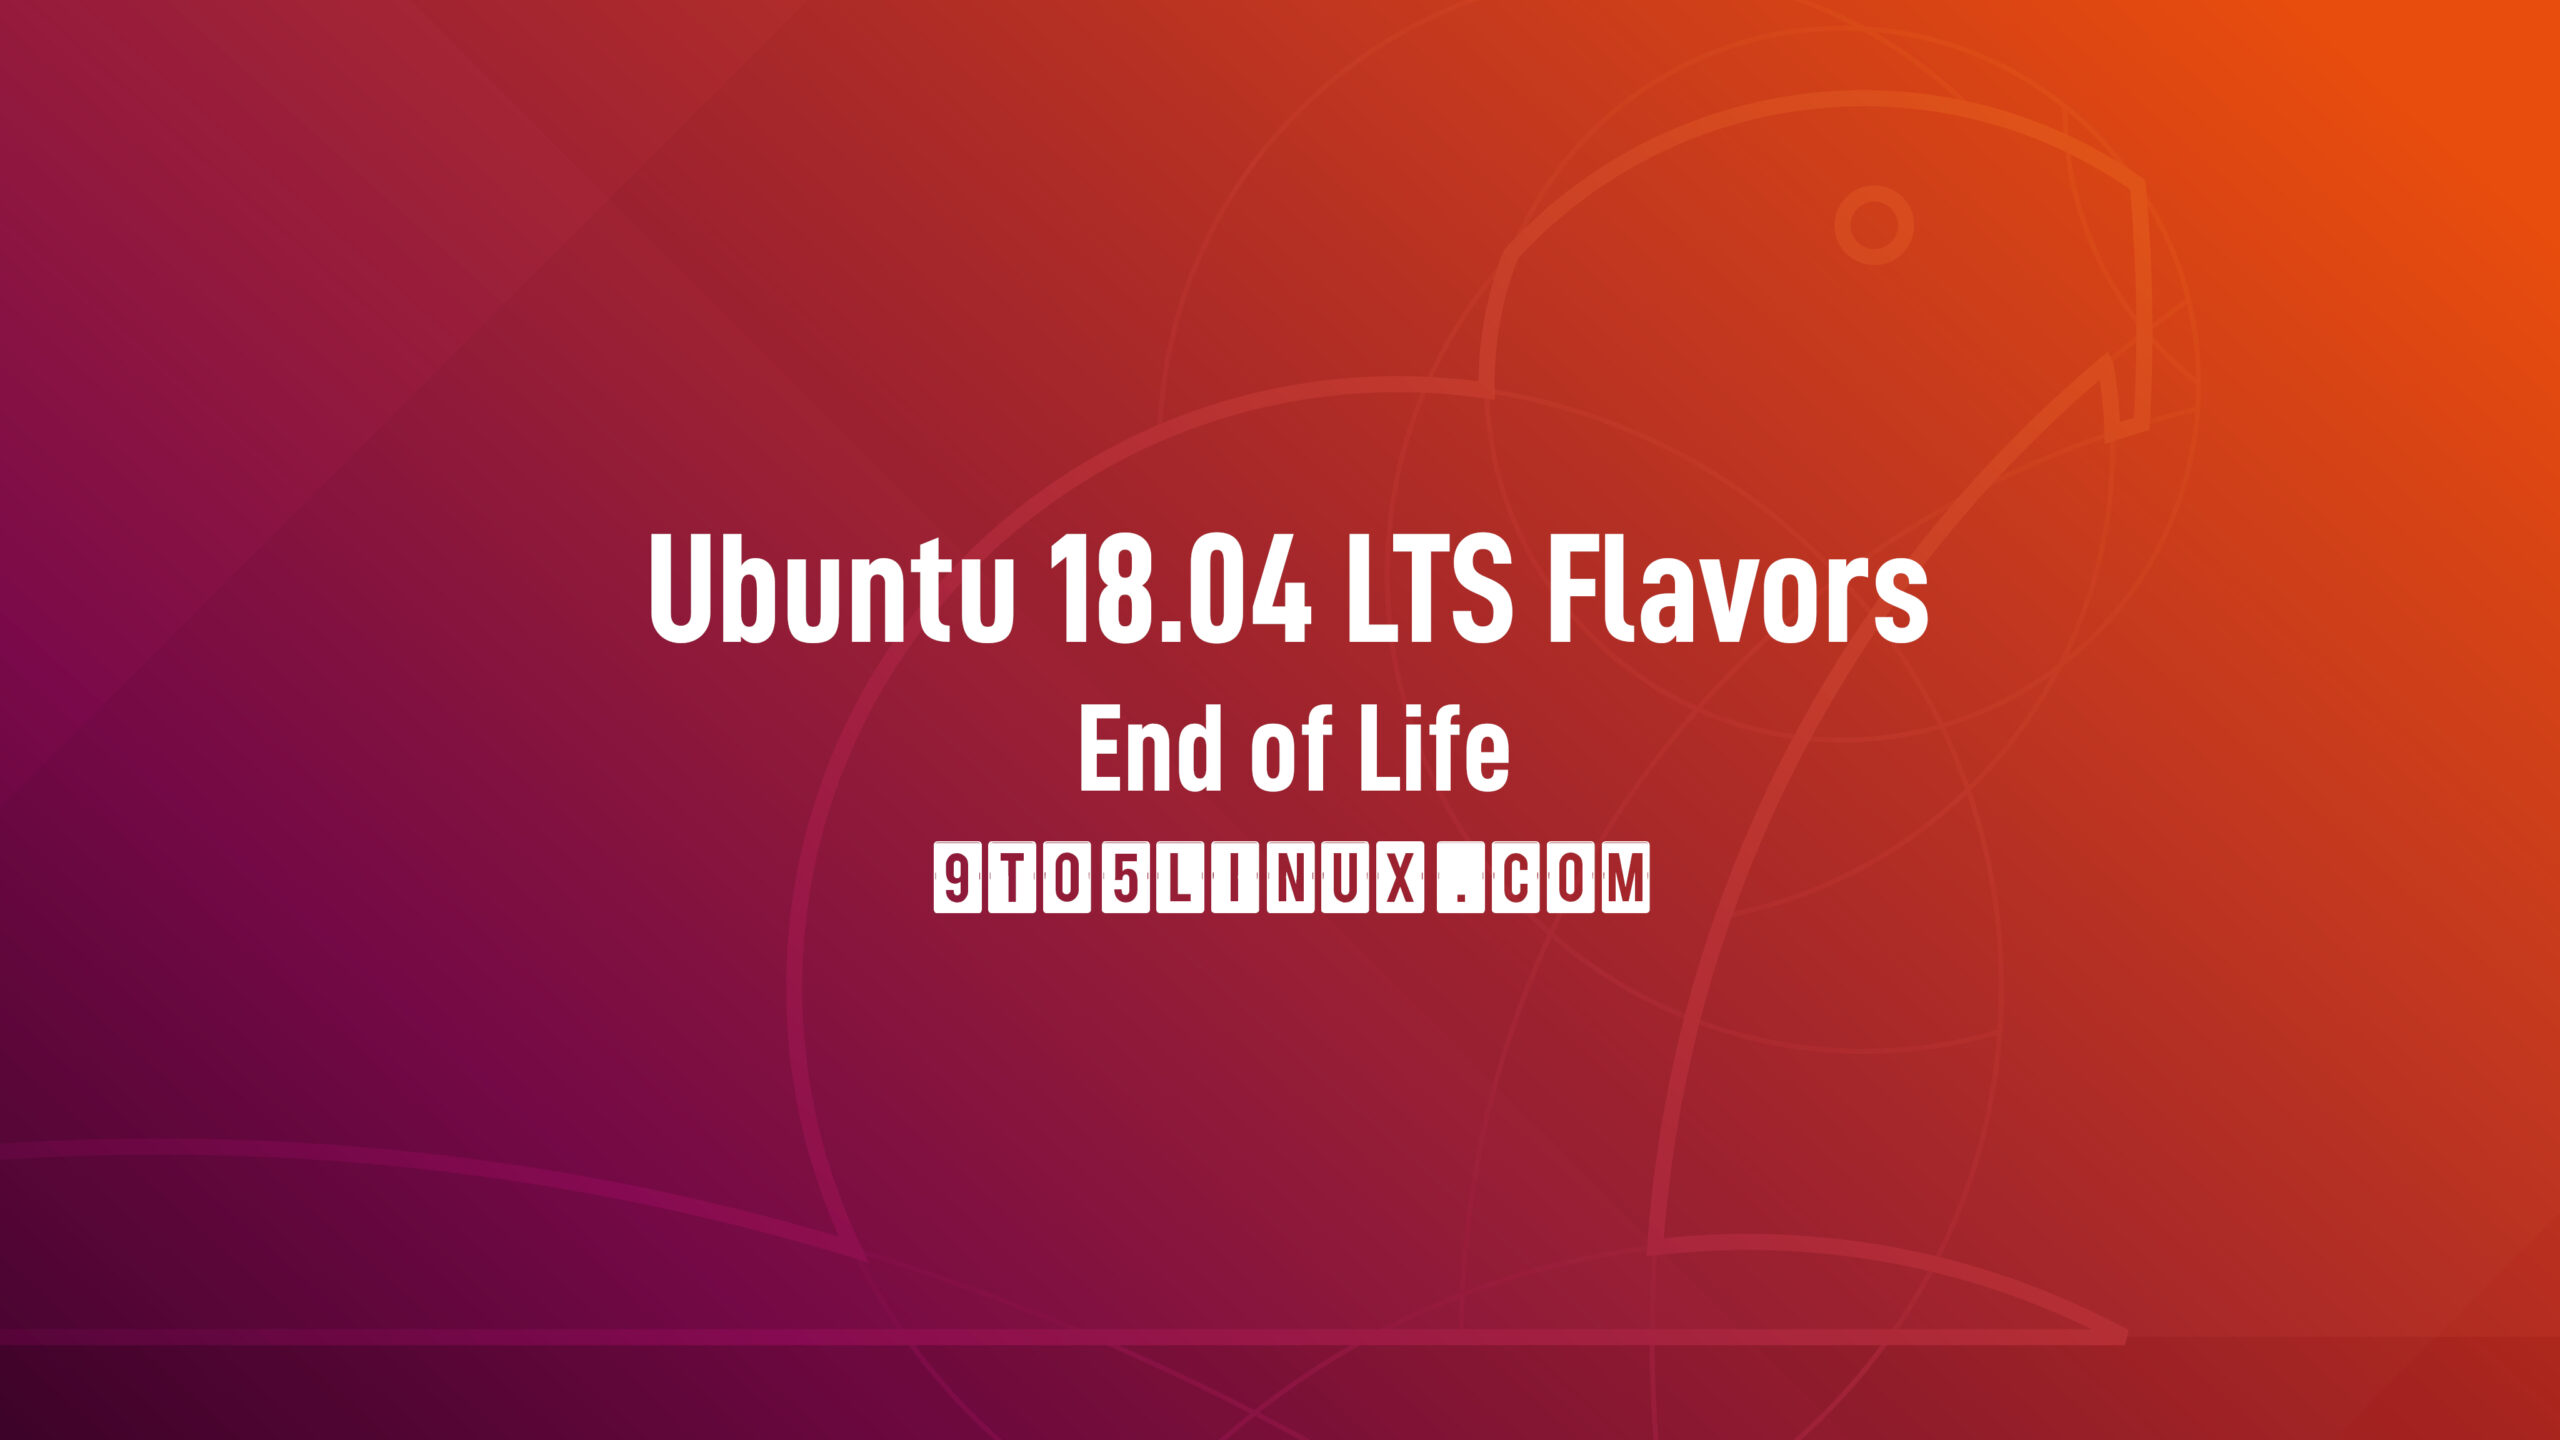 Ubuntu 18.04 Flavors Reach End of Life, Users Urged to Upgrade to 20.04 LTS